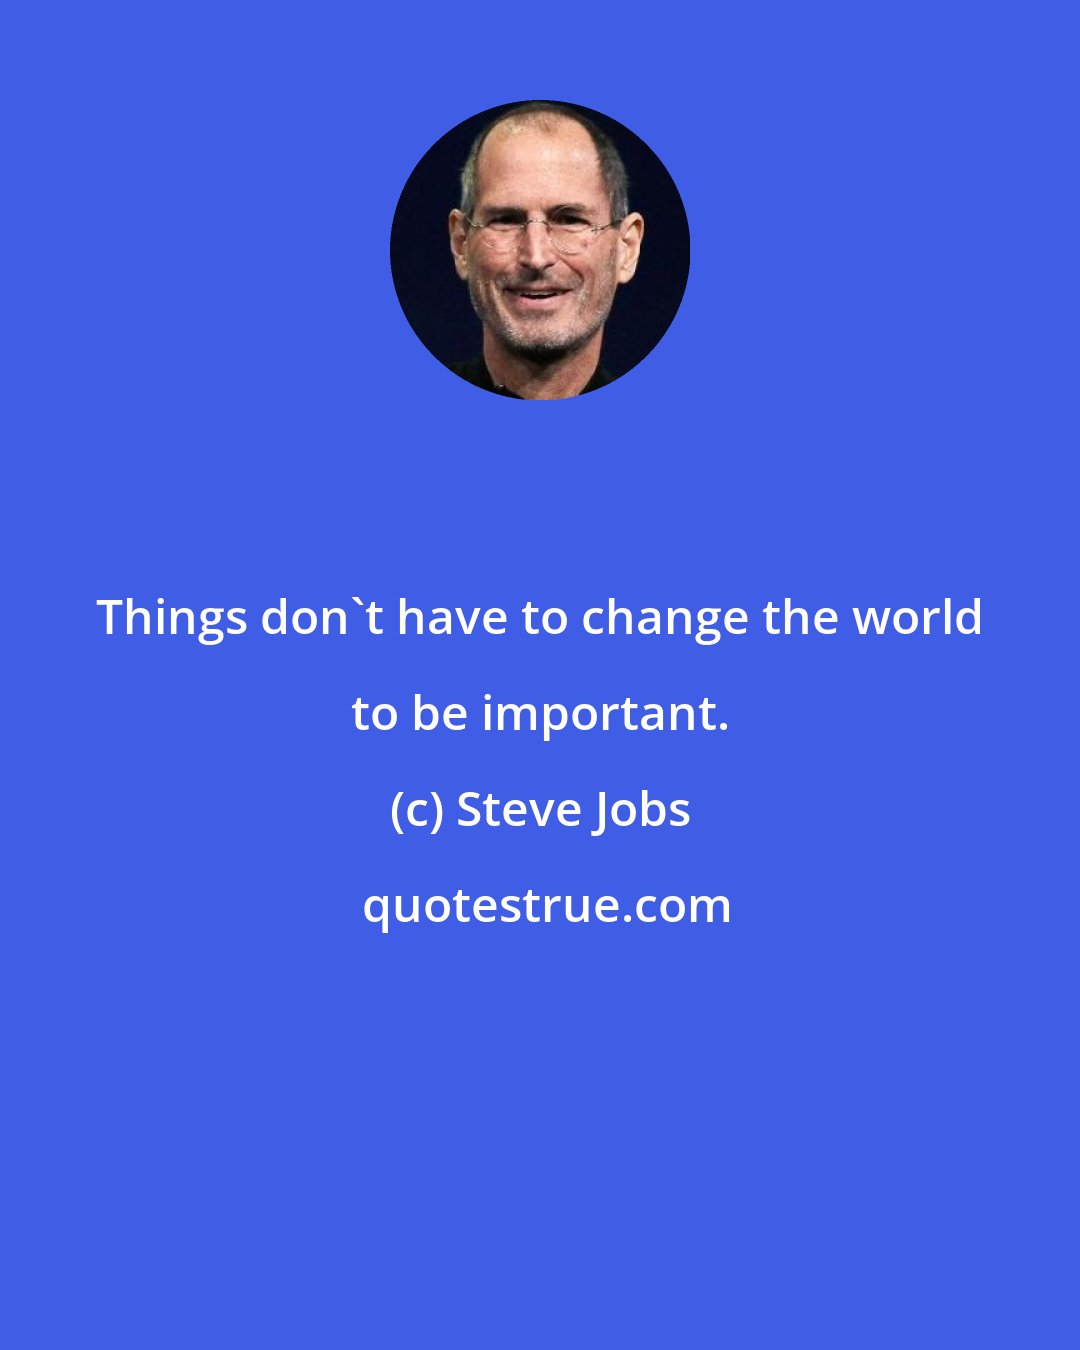 Steve Jobs: Things don't have to change the world to be important.